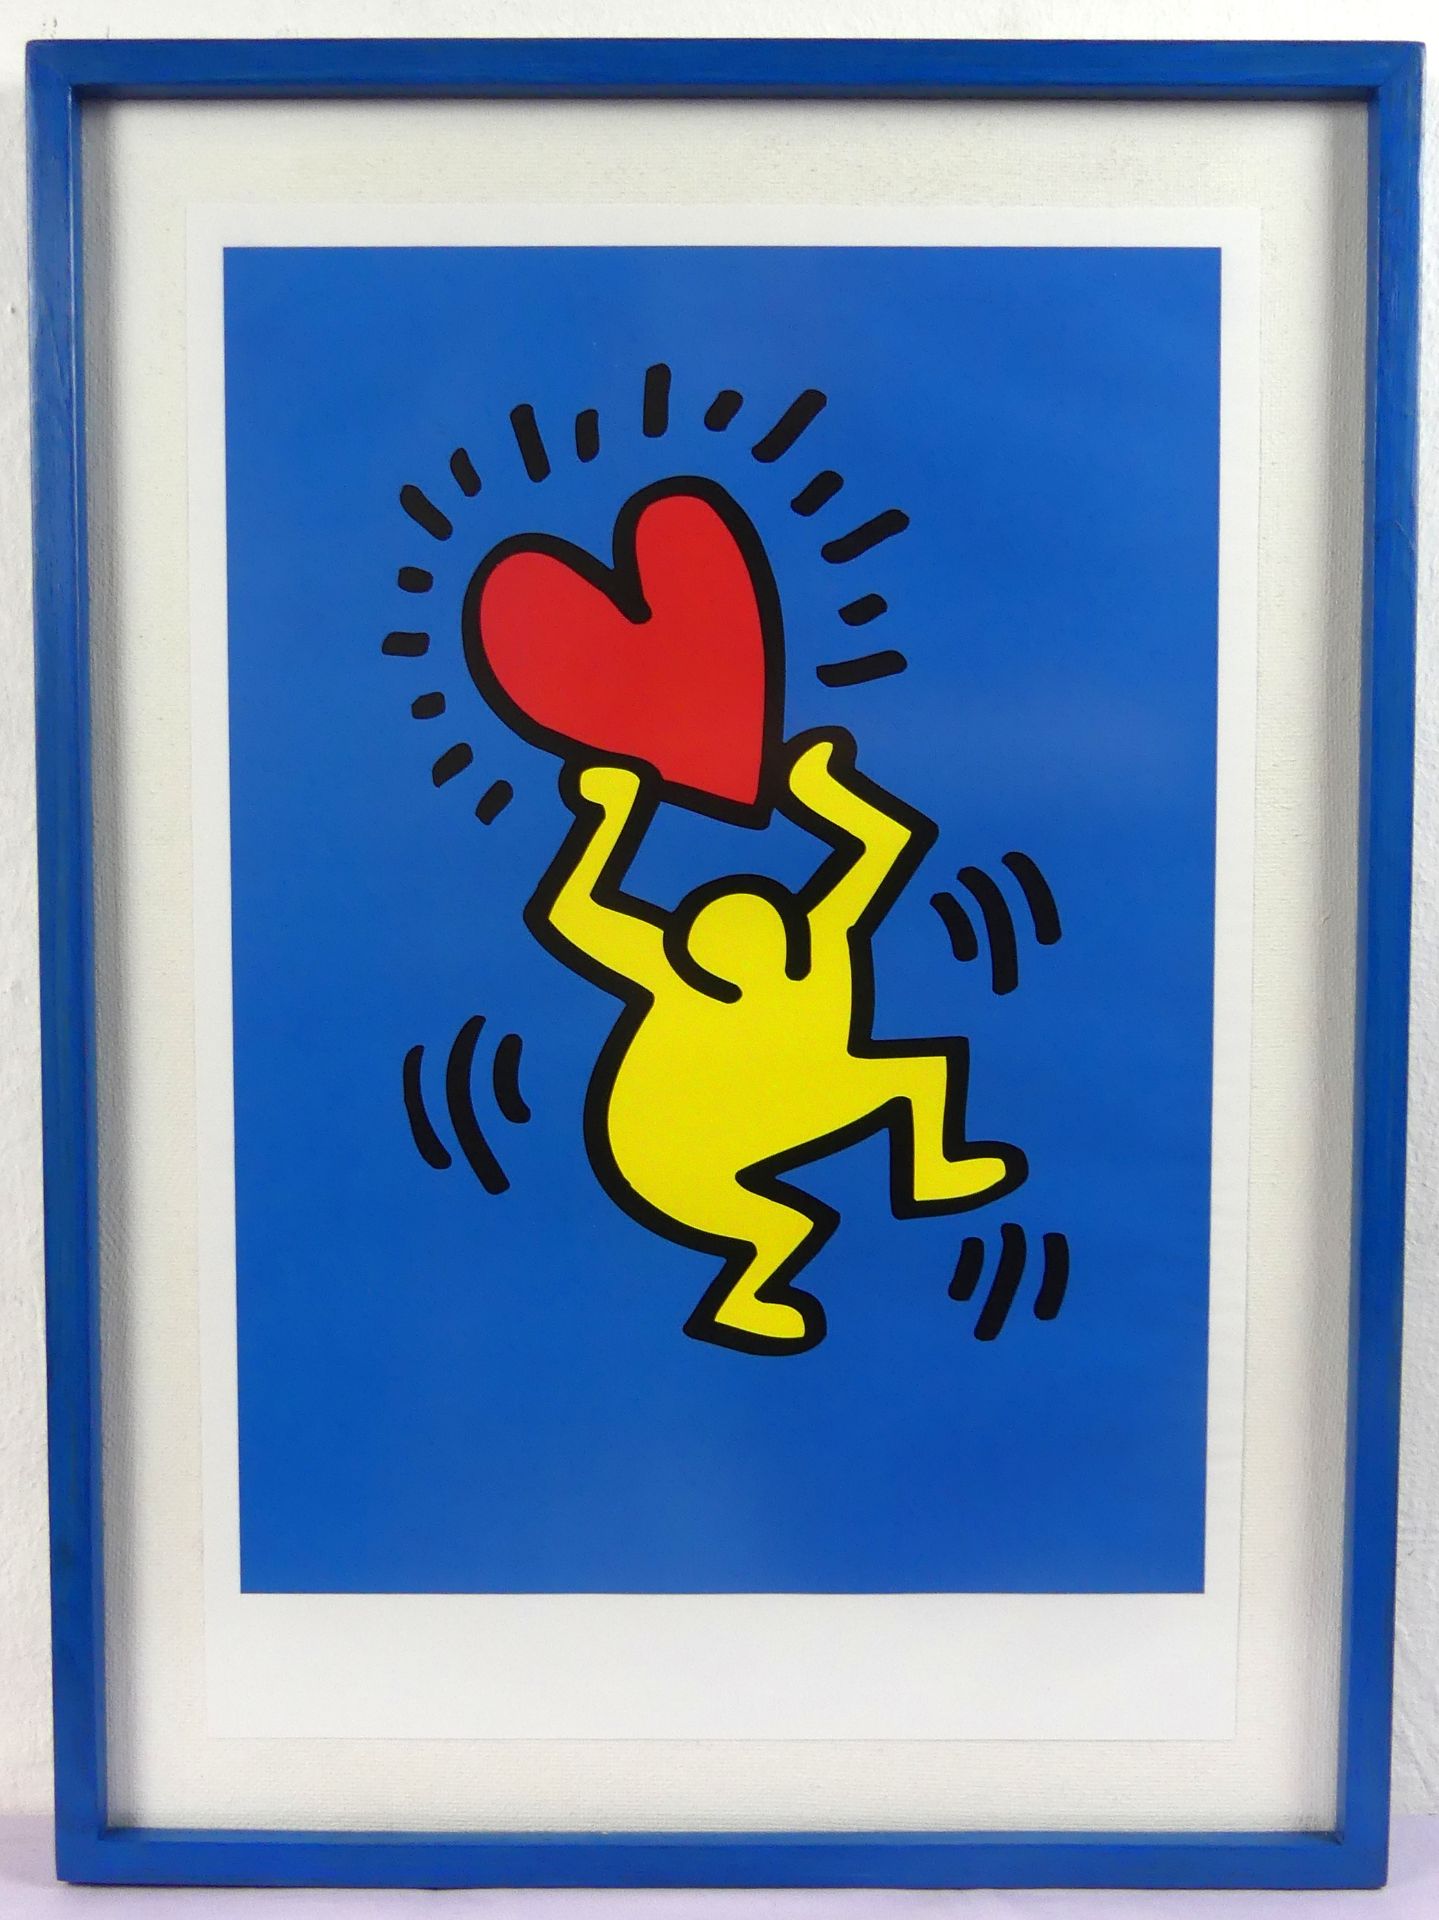 KEITH HARING (1958-1990), "Dancing Red Heart", ca. 50 x 36 cm,